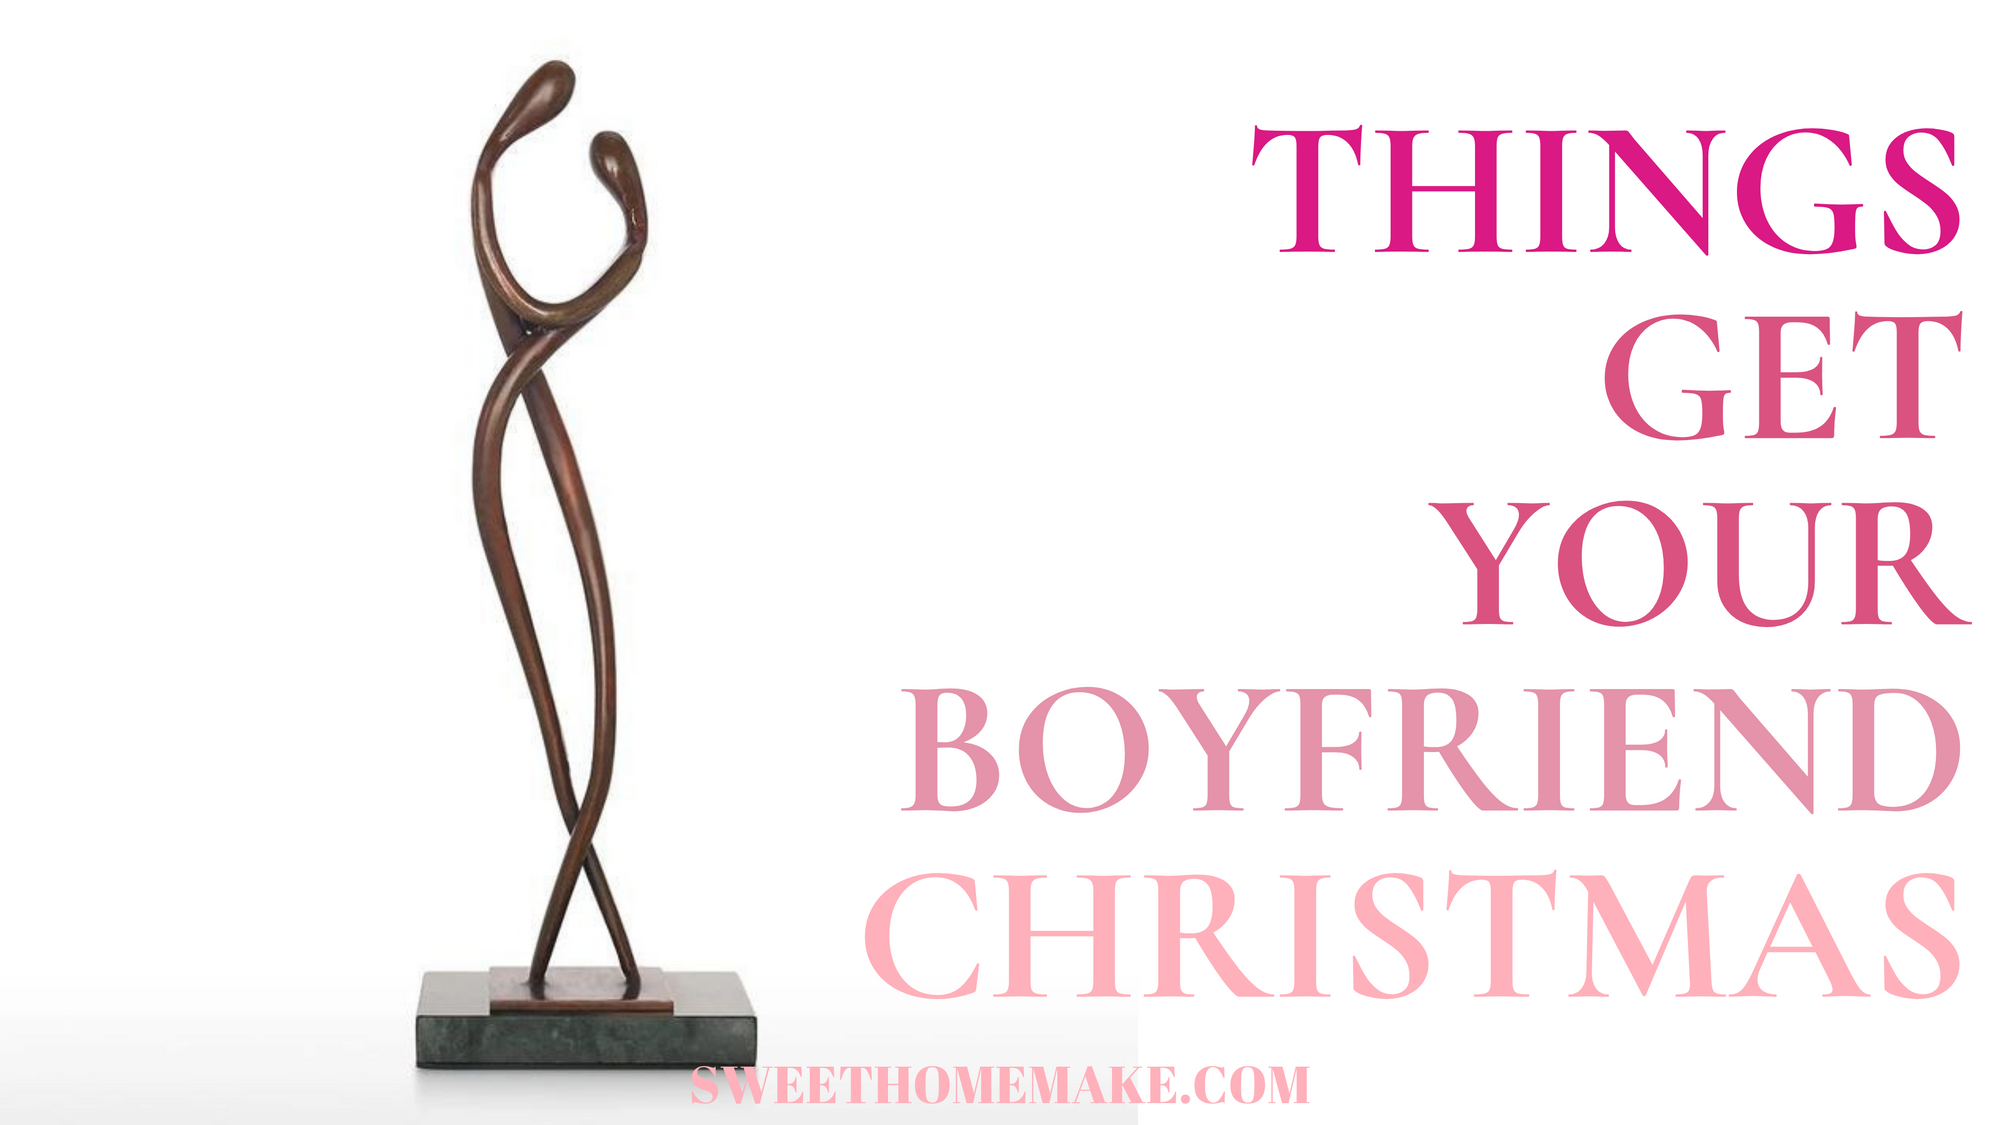 Cute Things to Get Your Boyfriend For Christmas by Romantic Relationships